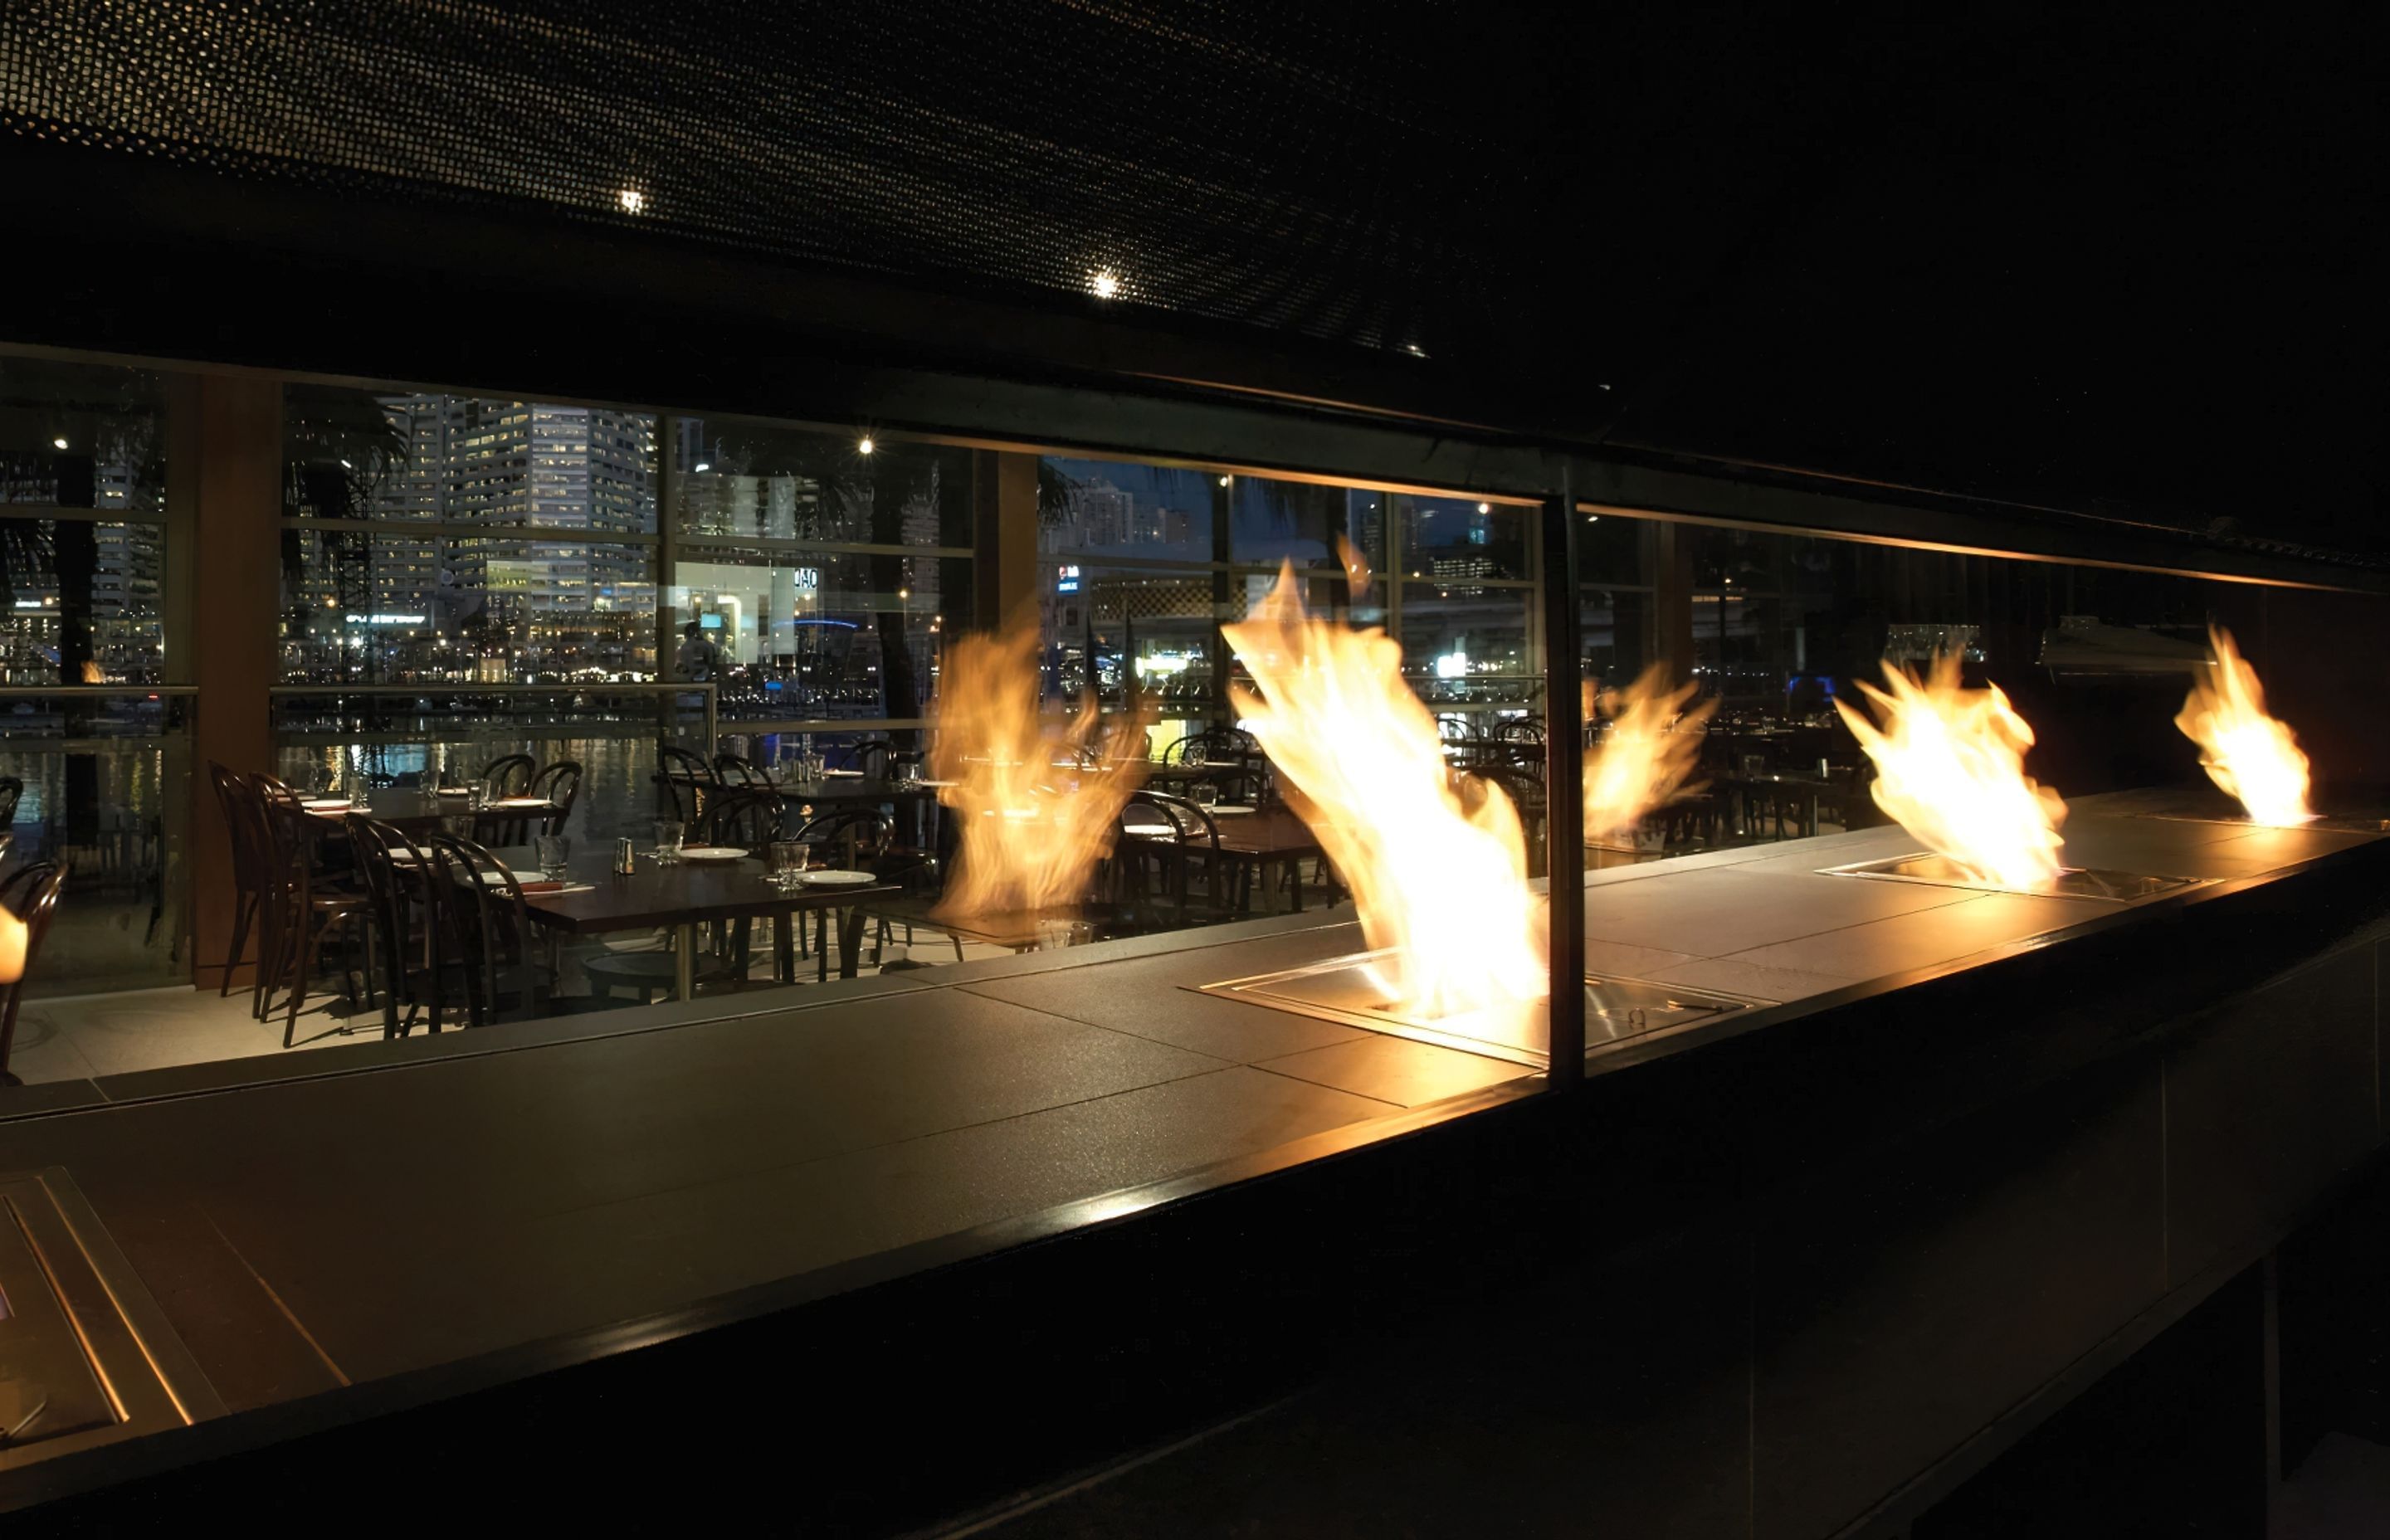 Case Study: Fire delights